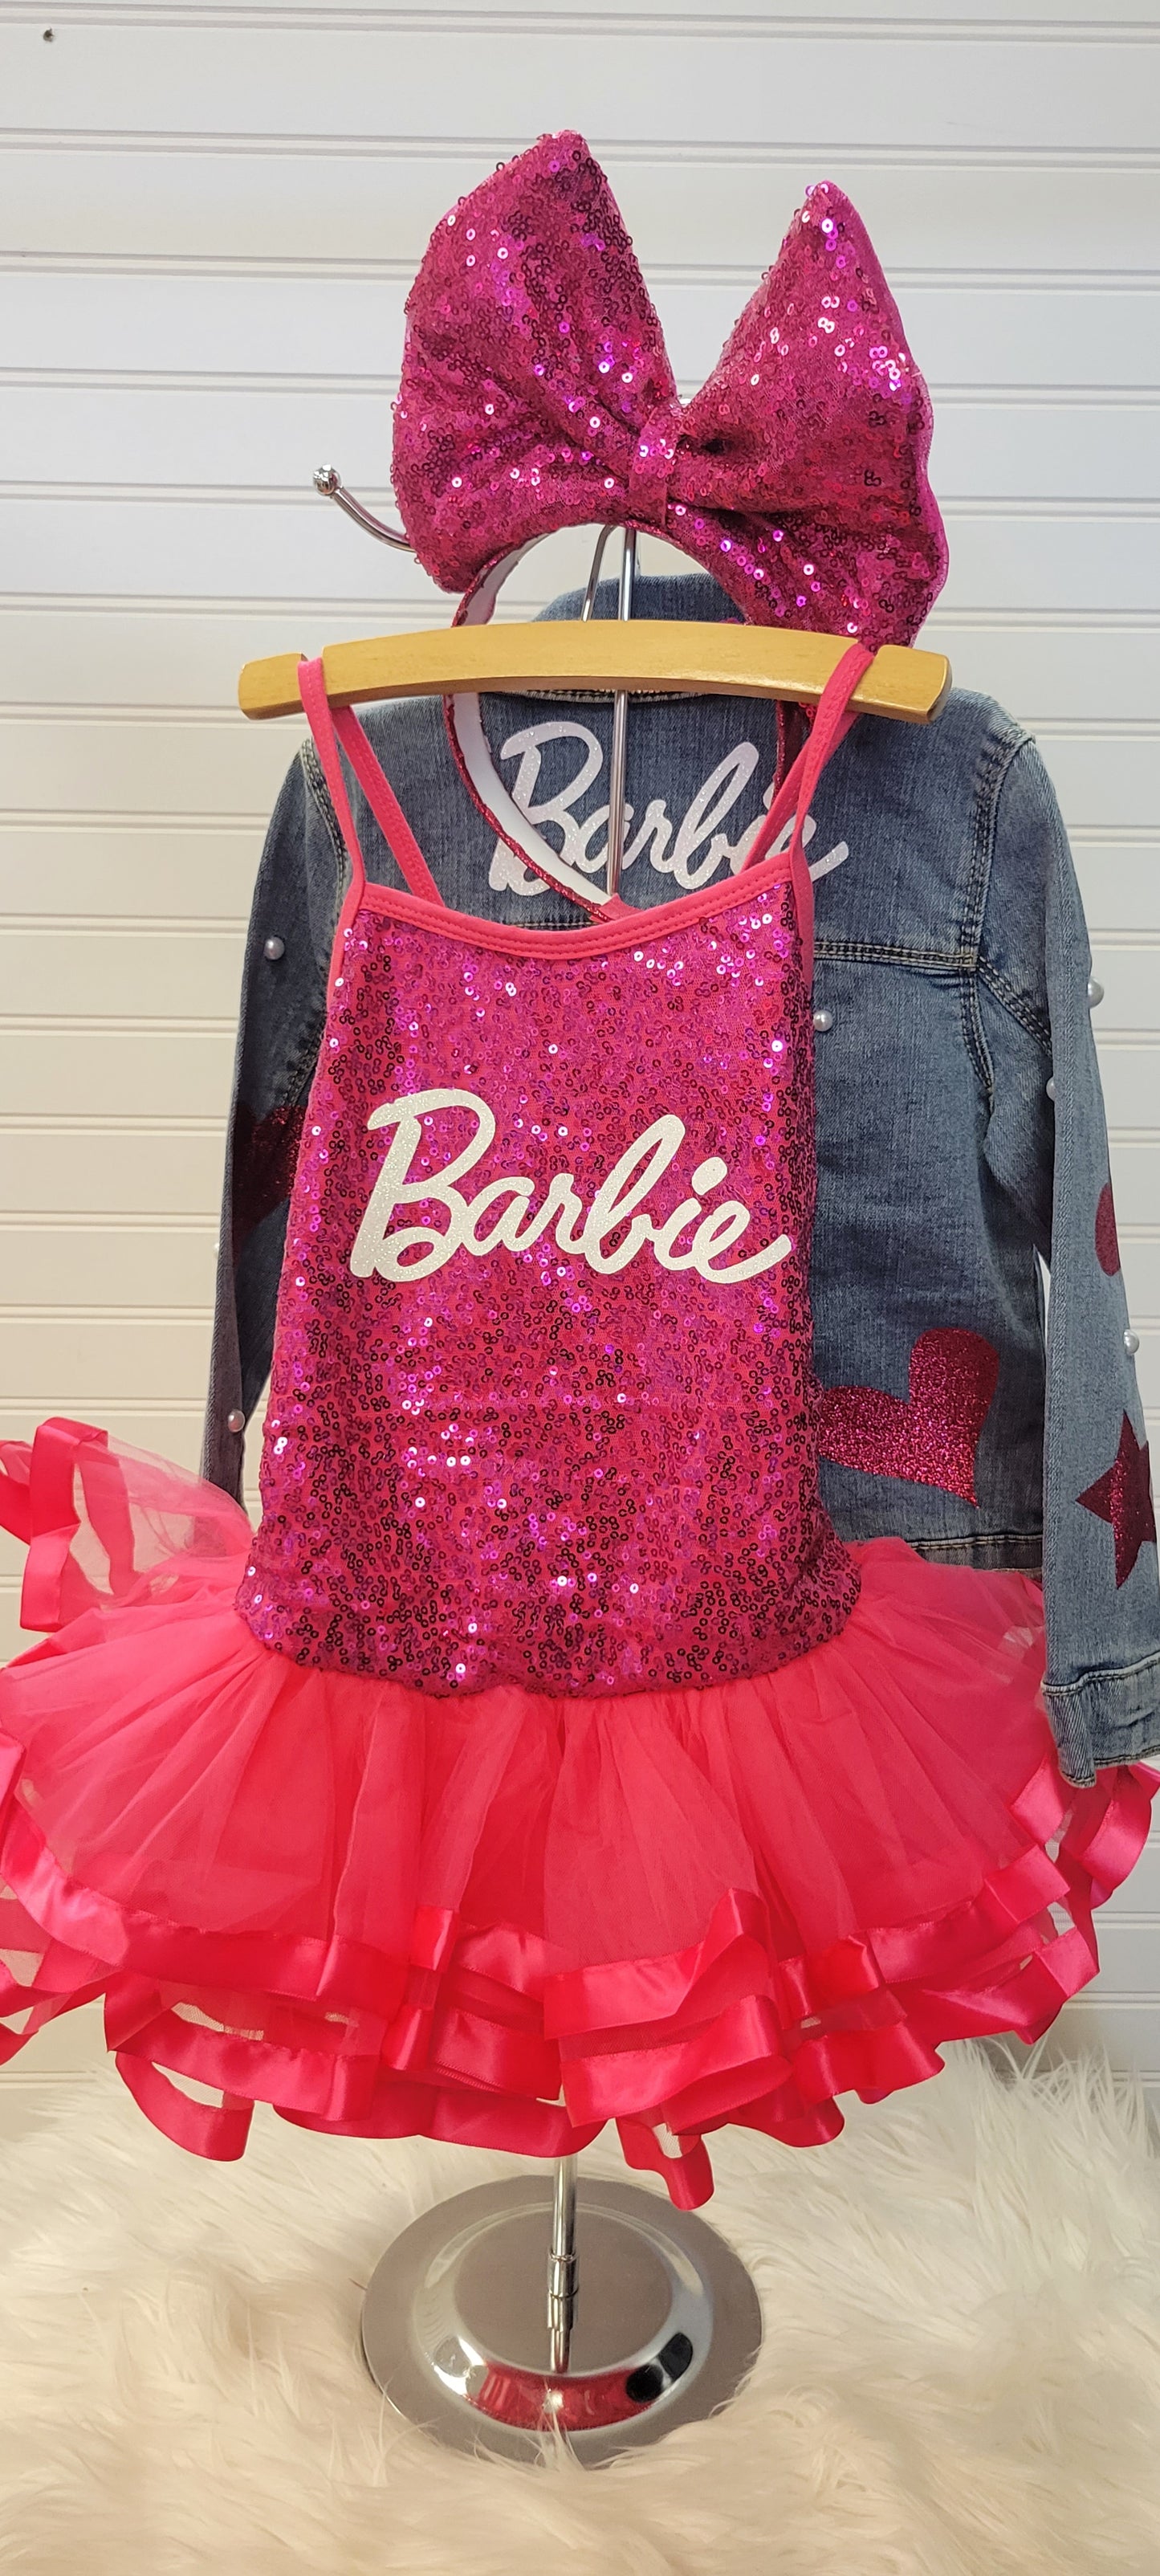 Barbie Outfit, jacket,headpiece and dress.